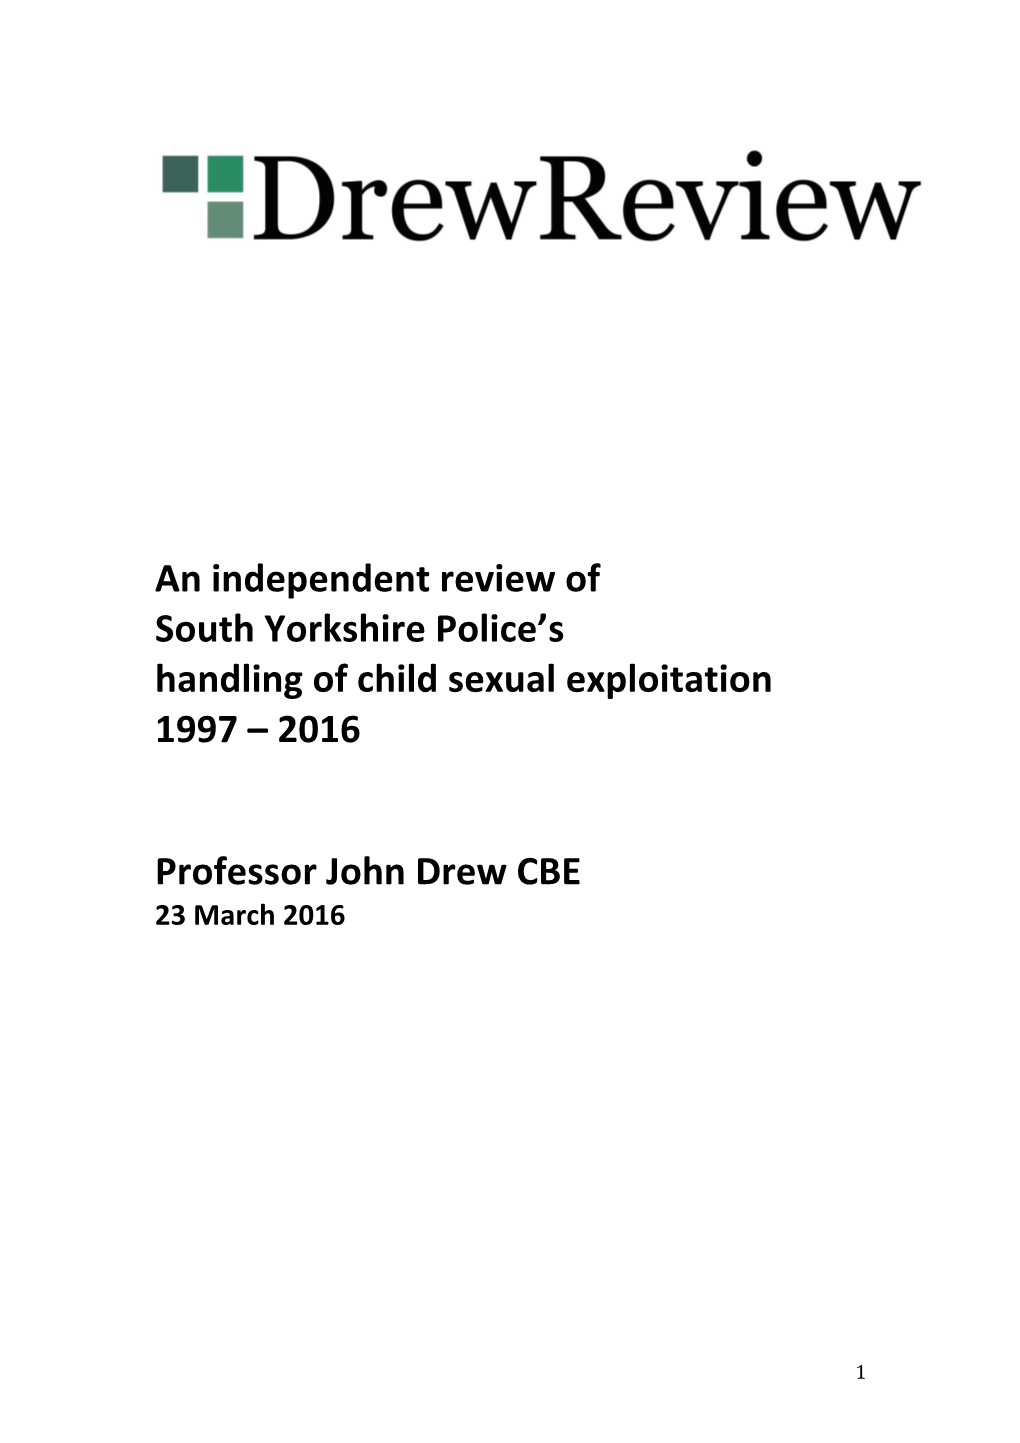 An Independent Review of South Yorkshire Police's Handling of Child